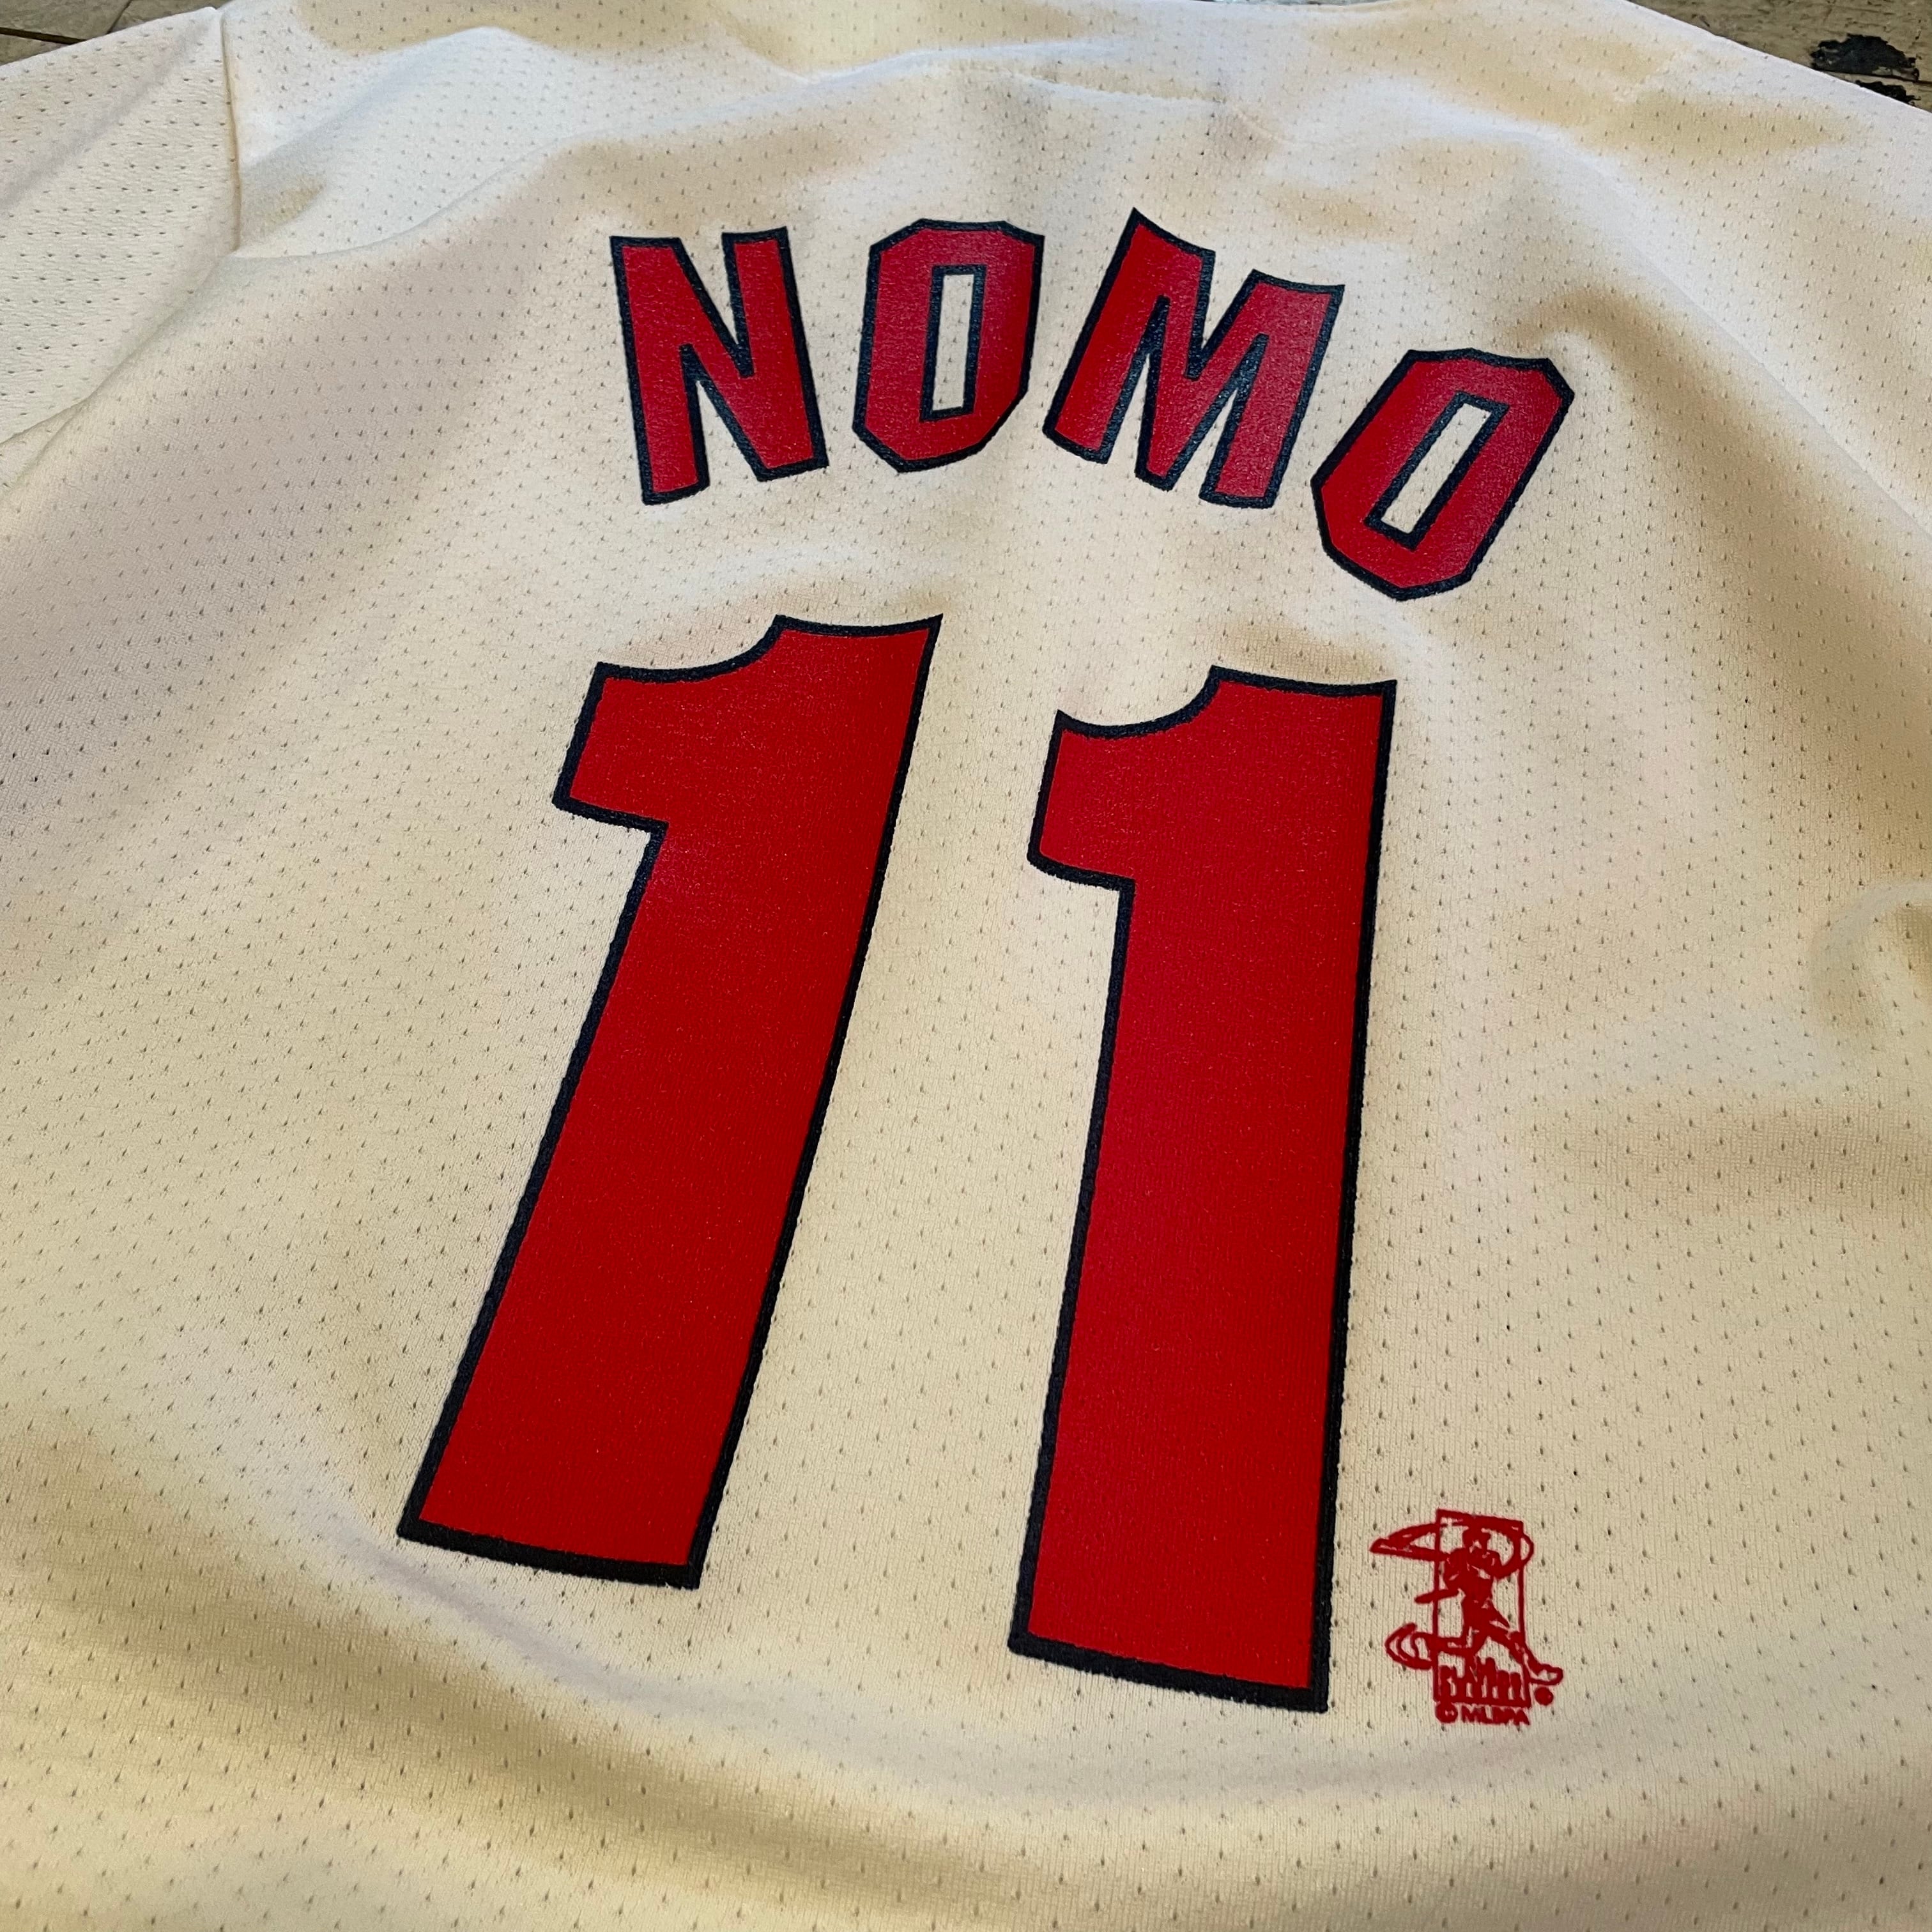 s〜 majestic RED SOX "NOMO" baseball shirt   What’z up powered by BASE